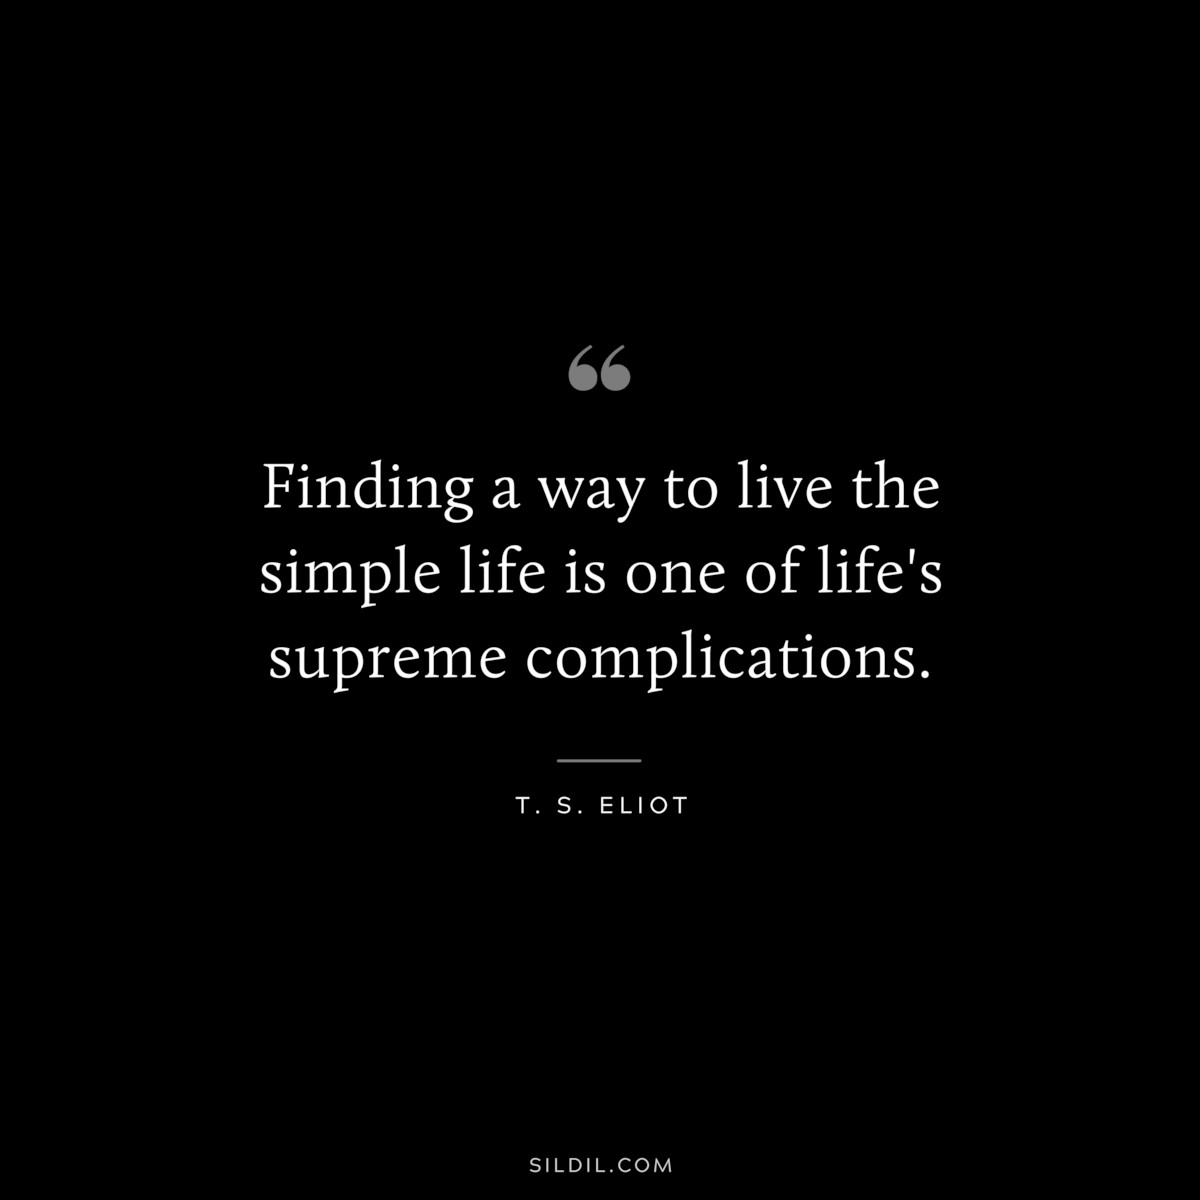 Finding a way to live the simple life is one of life's supreme complications. ― T. S. Eliot